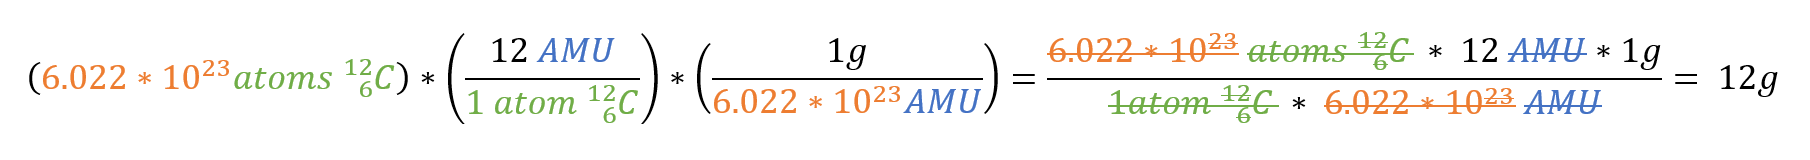 conversion of number of atoms into grams using avogardo's number